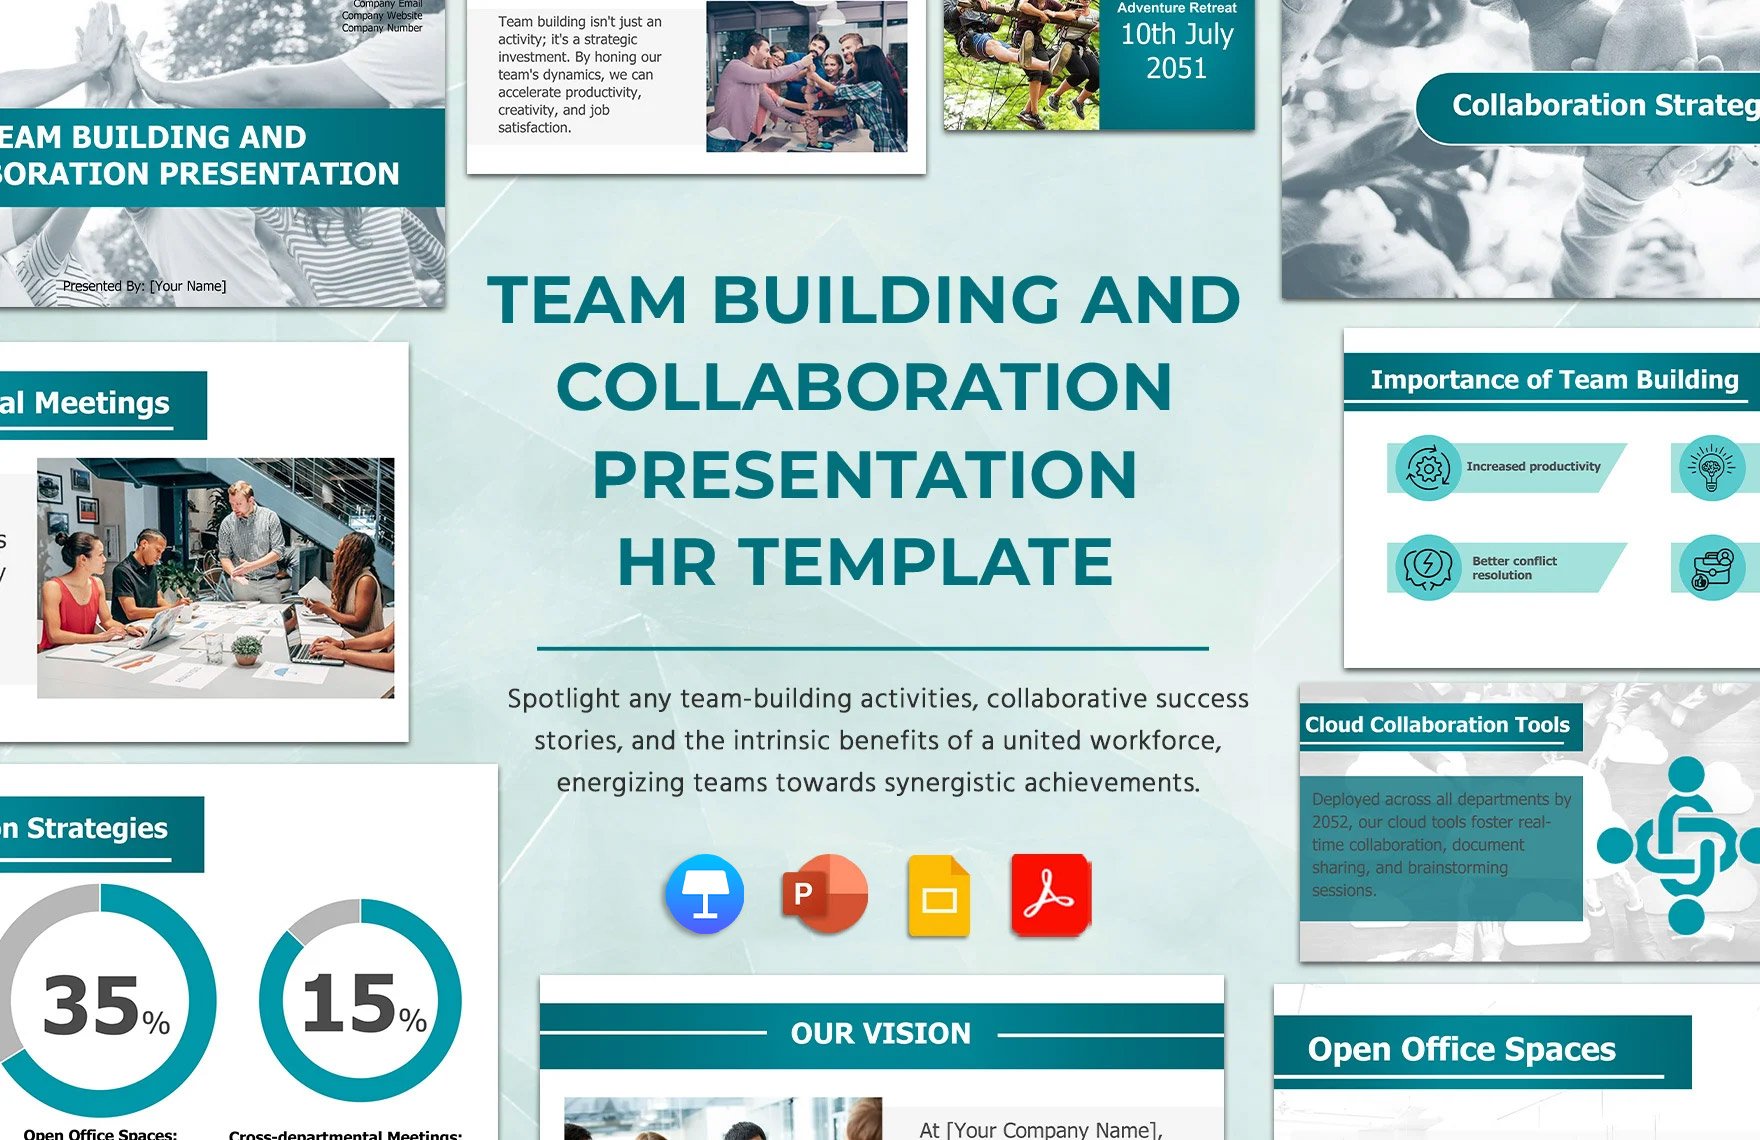 Team Building and Collaboration Presentation HR Template